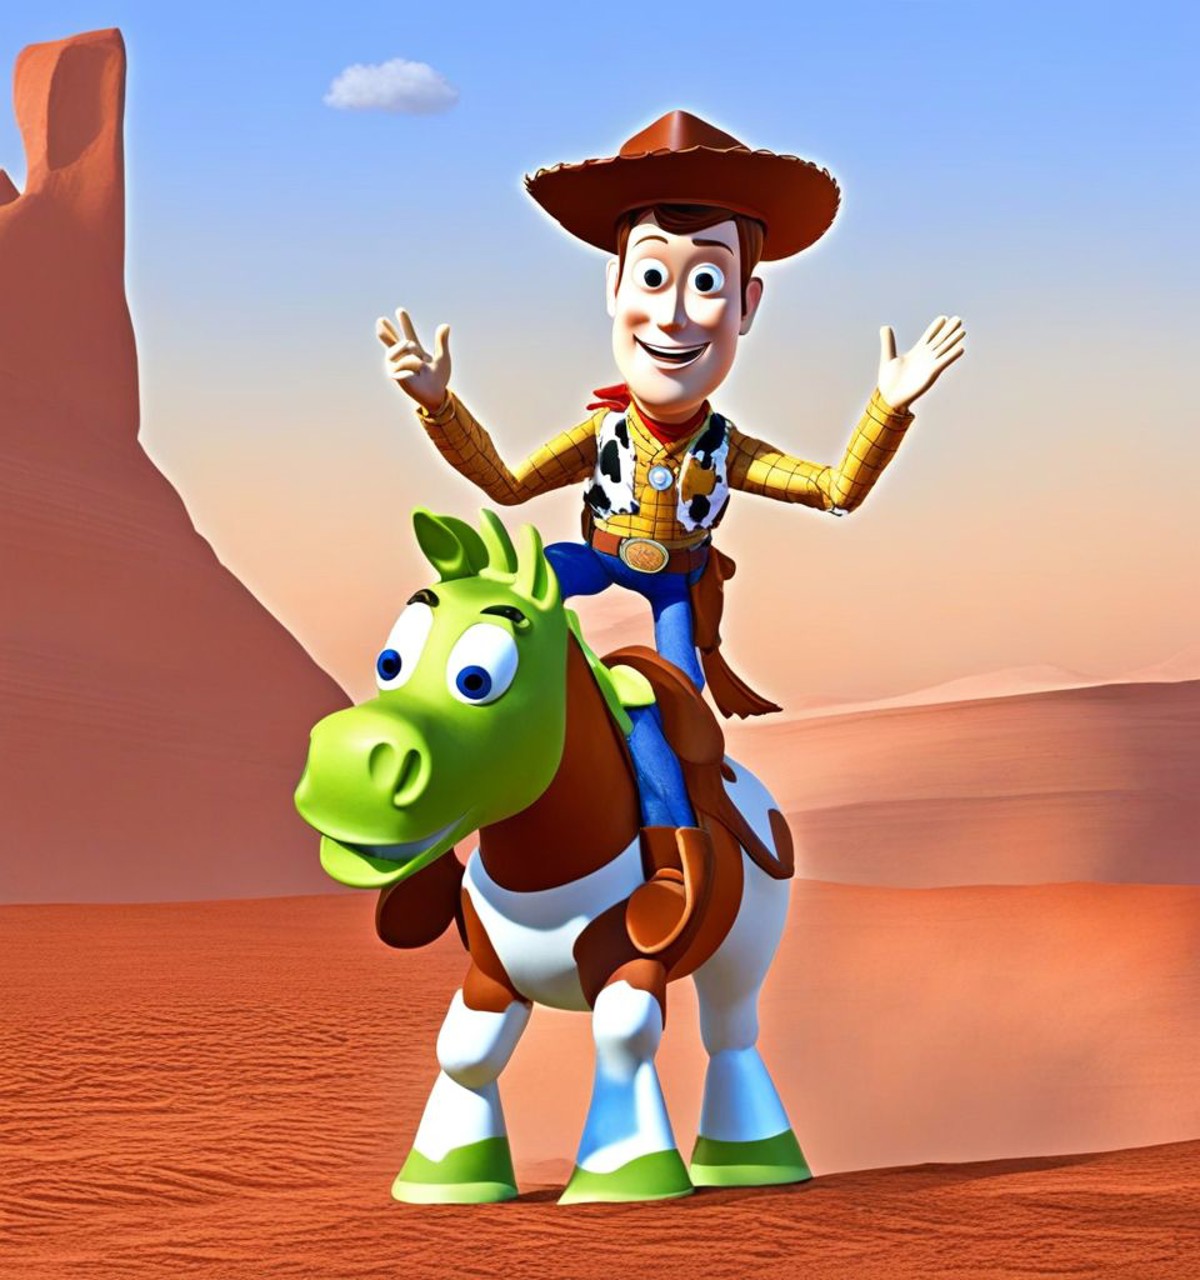 The cowboy  from toy story riding a horse on mars  DreamDisPix style <lora:SDXL-DreamDisPix-Lora-r32:0.8>